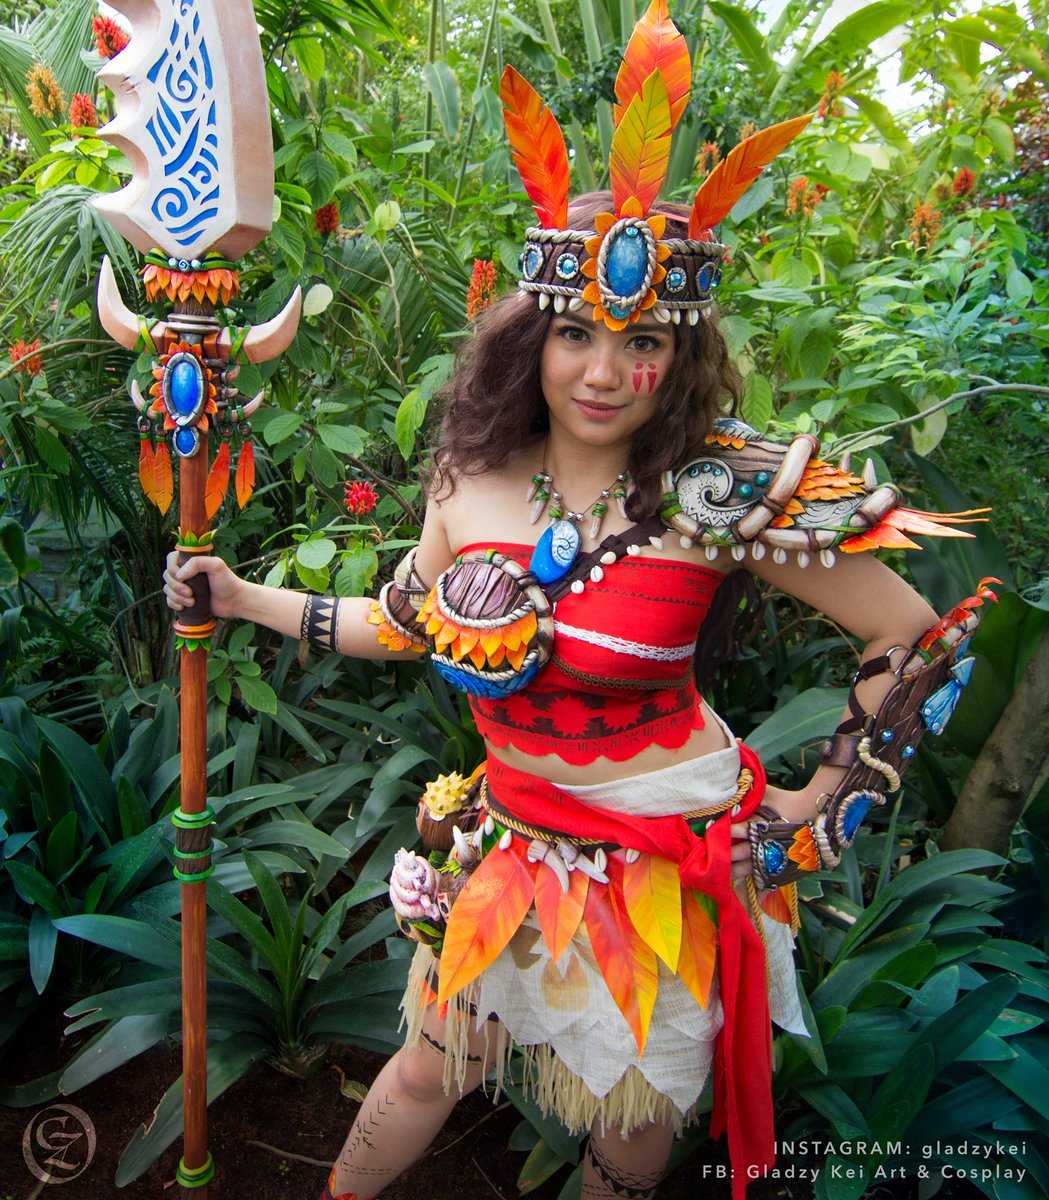 49 Hot Pictures Of The Disney Princess Moana Are Delight For Fans | Best Of Comic Books